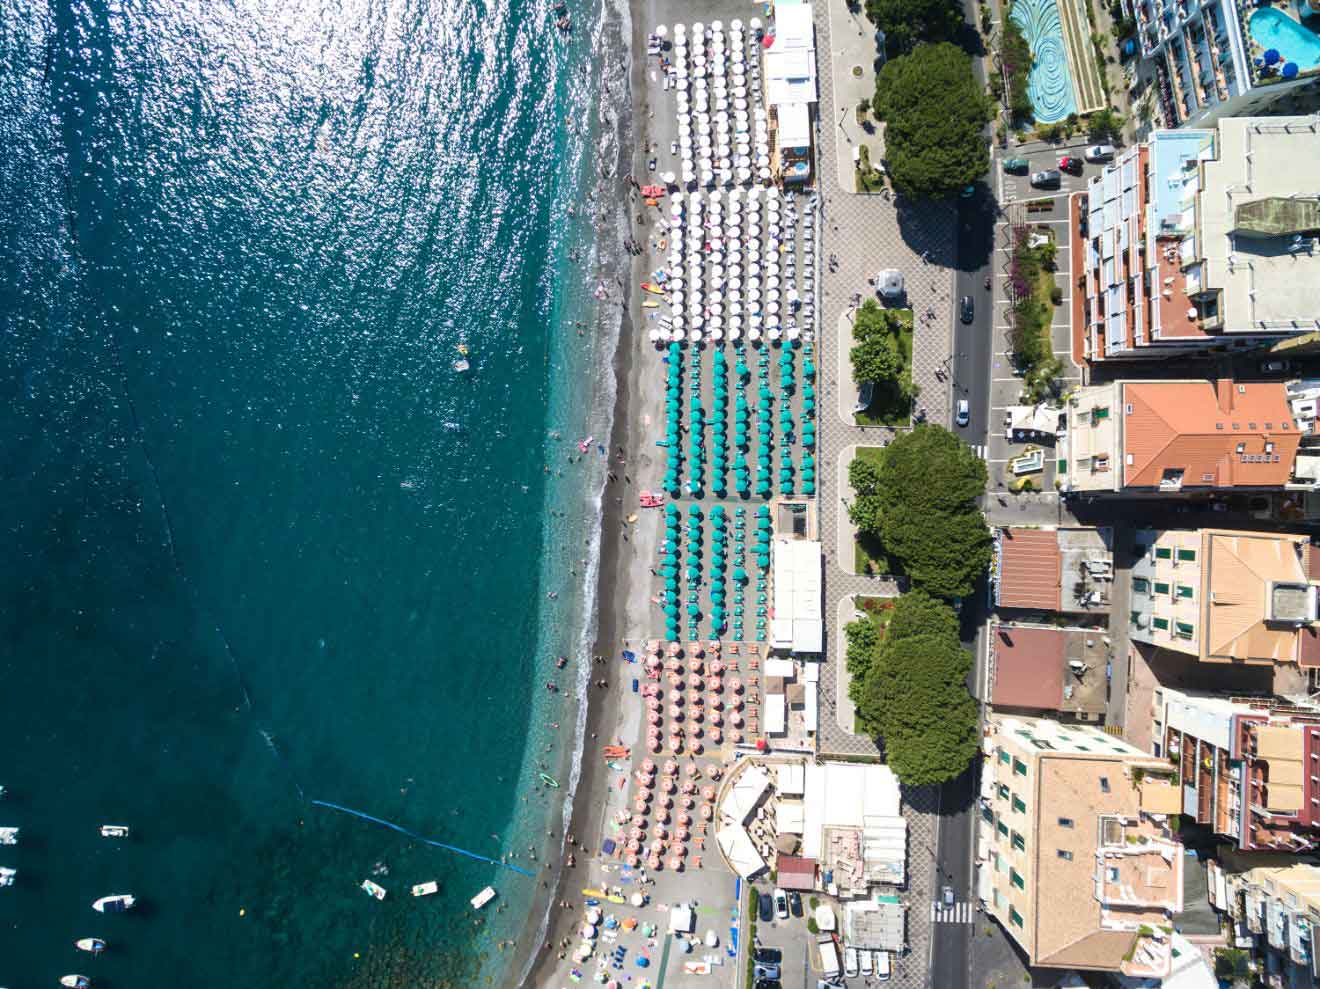 An aerial view of a beach and ocean in the towns of Maiori and Minor on the Amalfi Coast, Italy